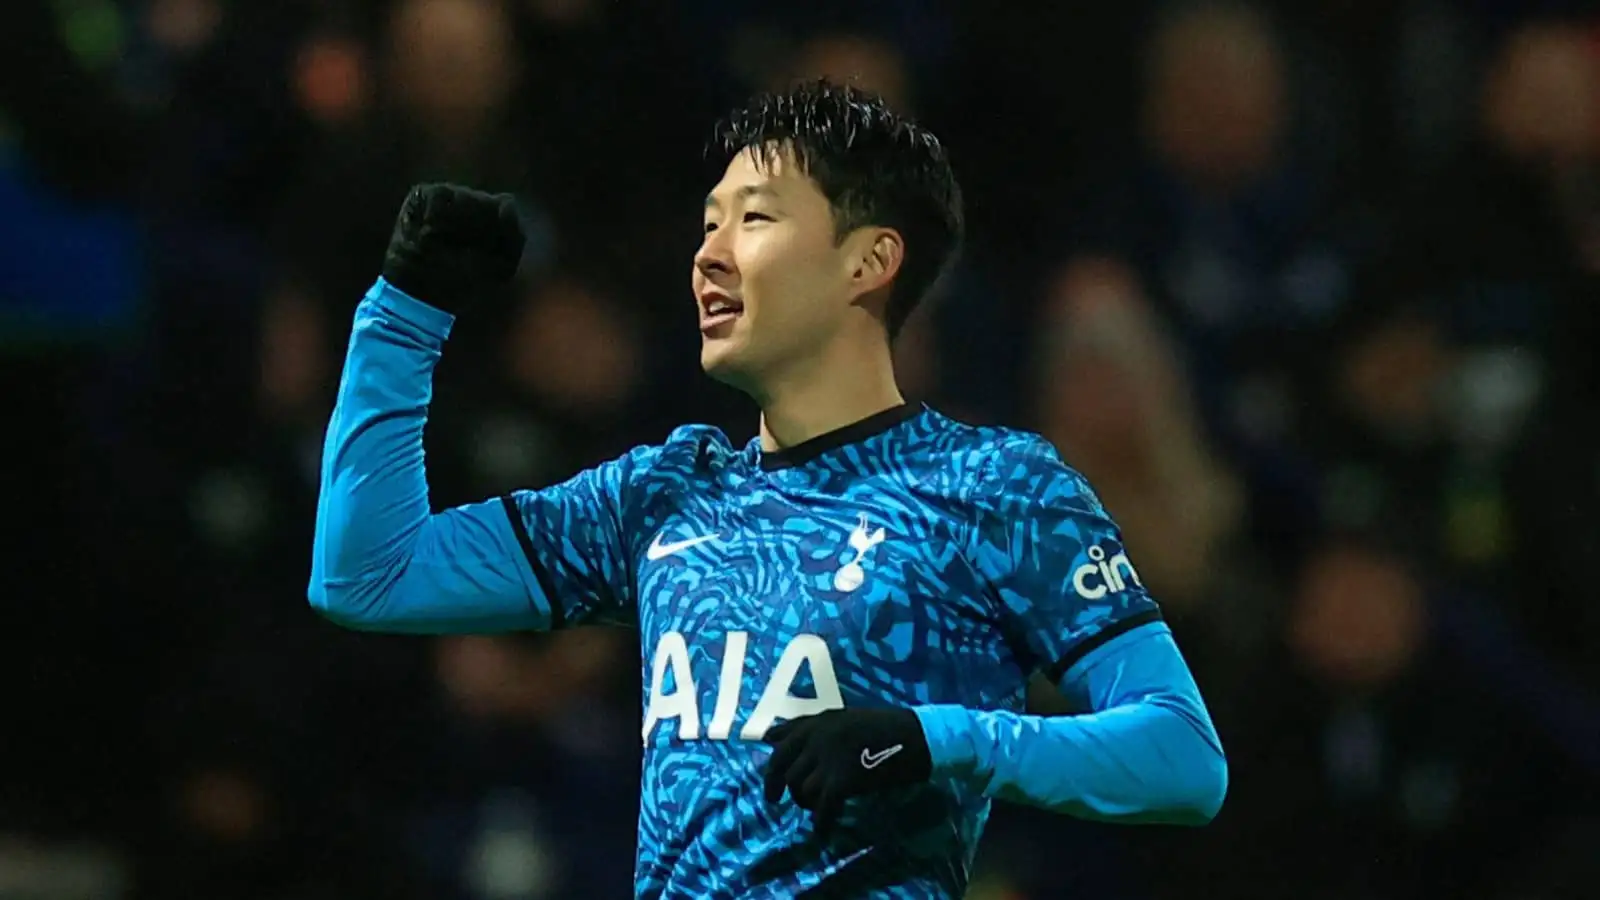 Son Heung Min set to be offered a new Tottenham Hotspur contract